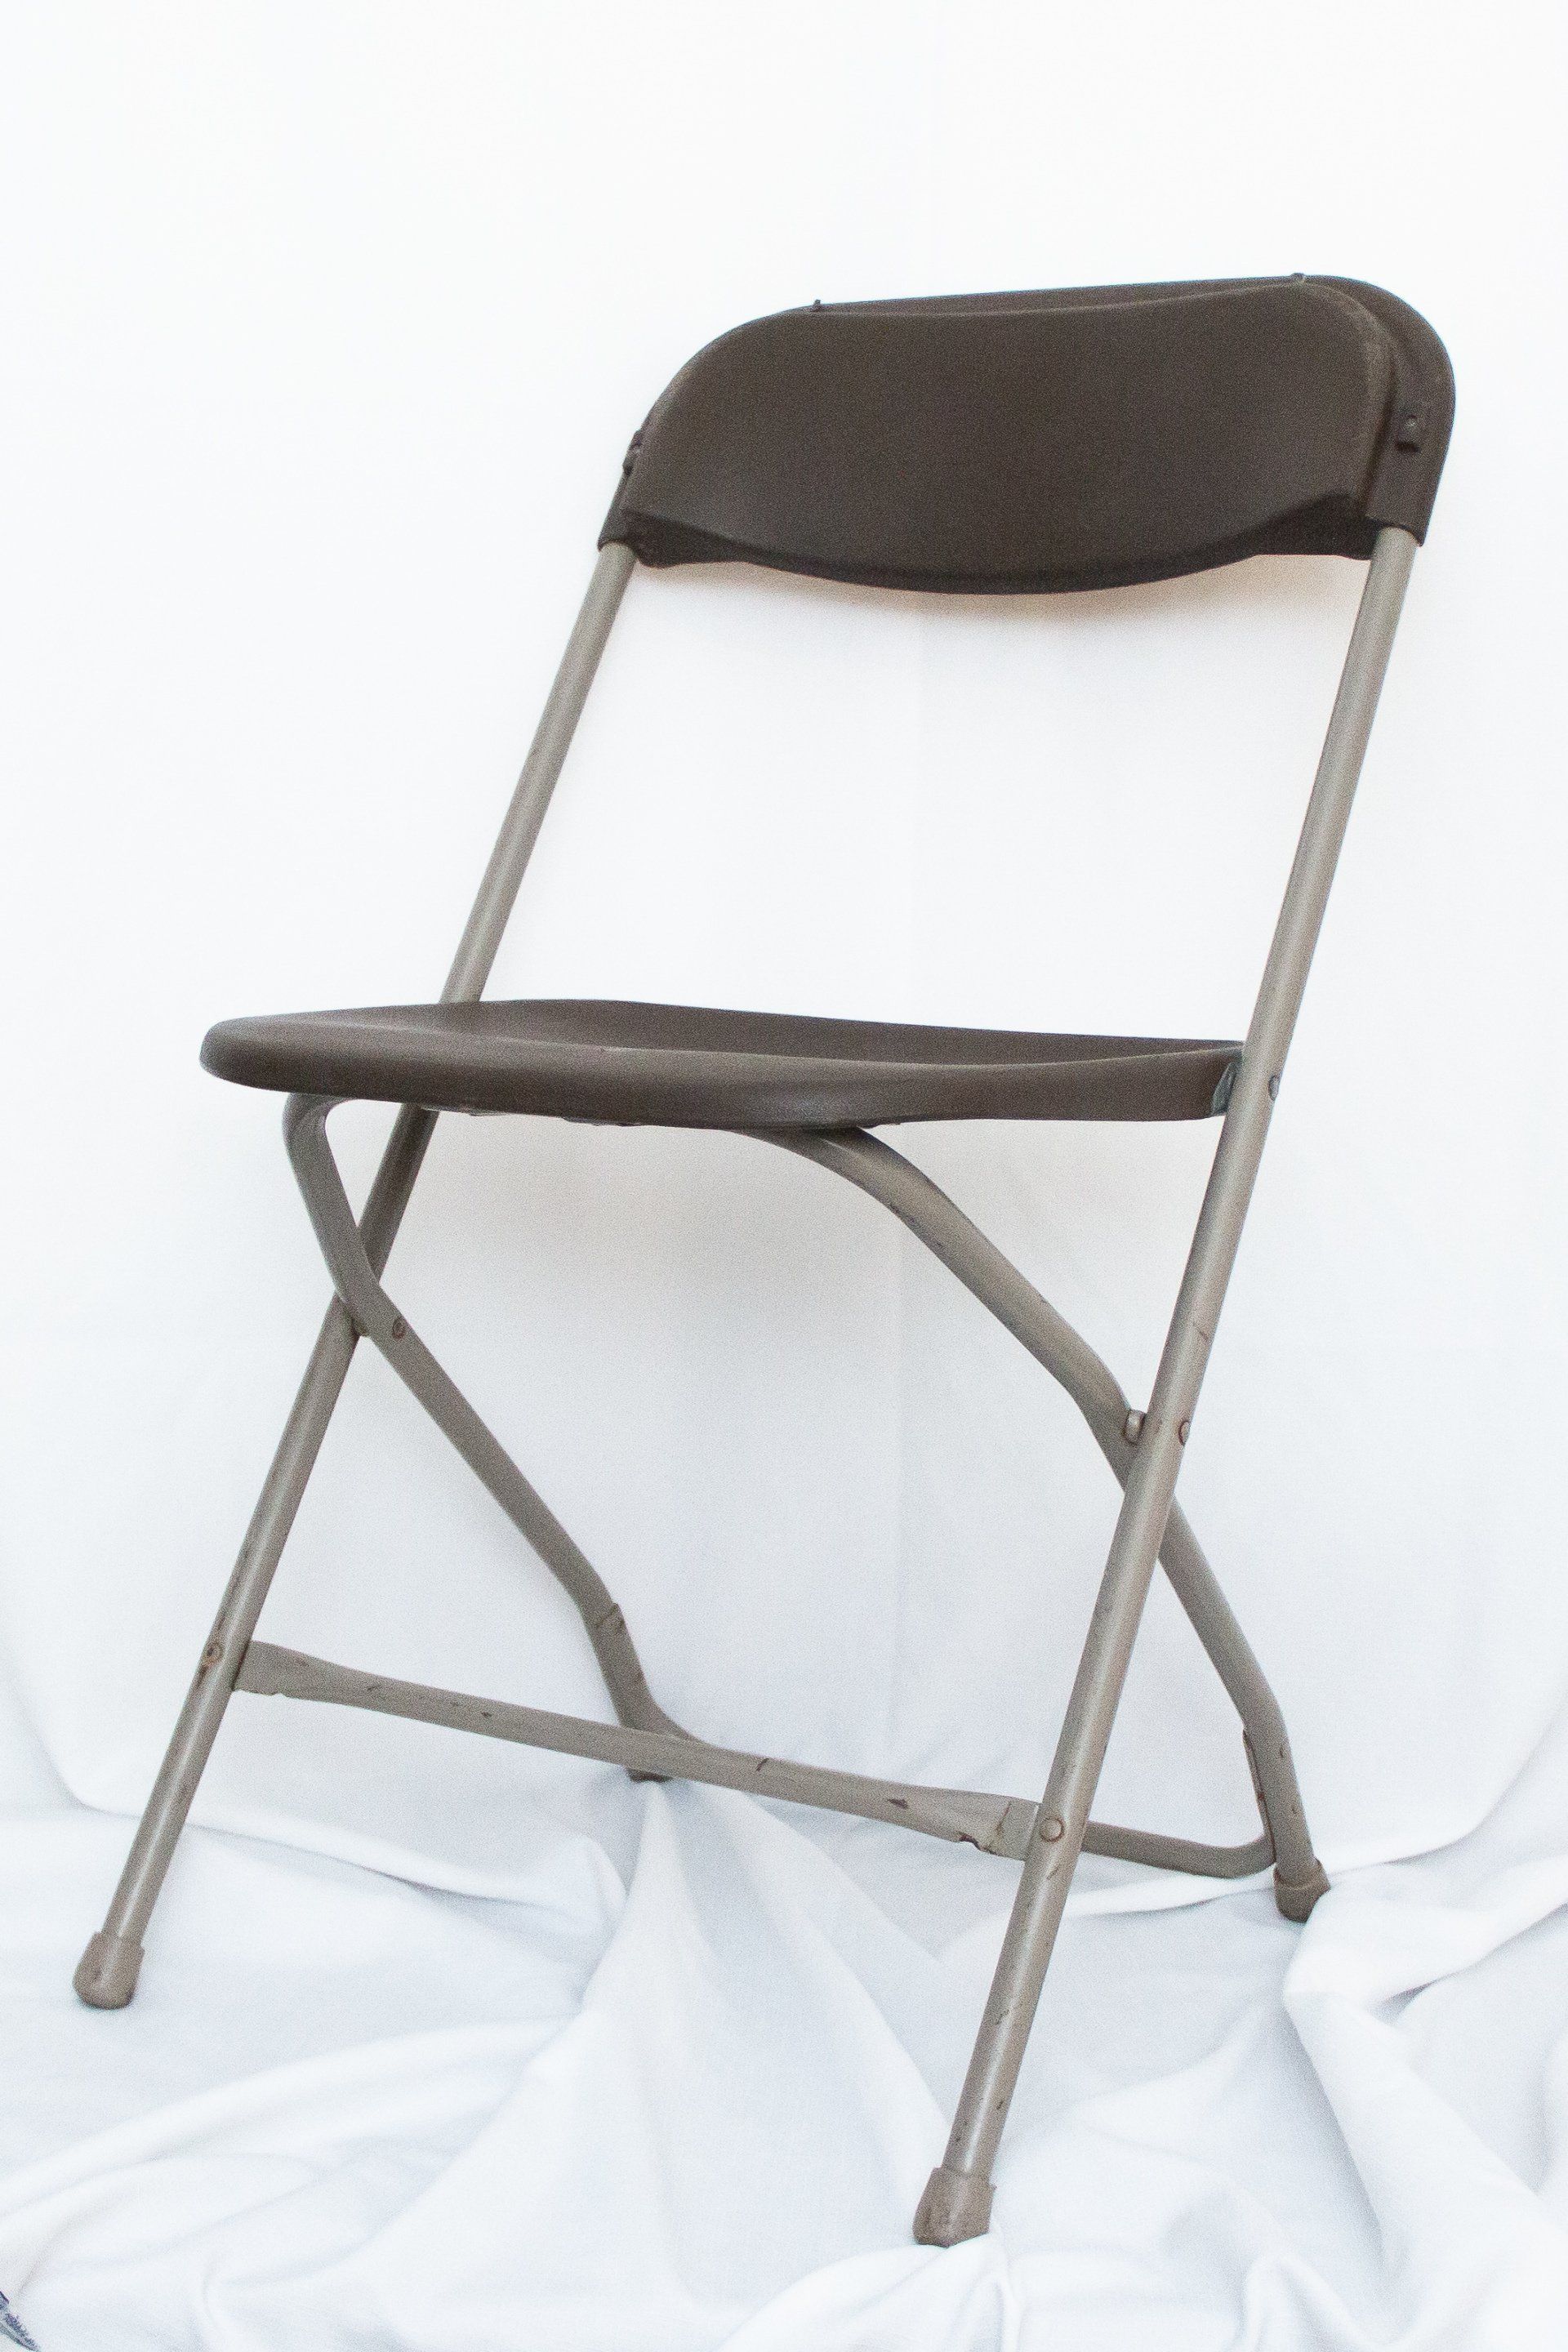 A folding chair is sitting on a white cloth